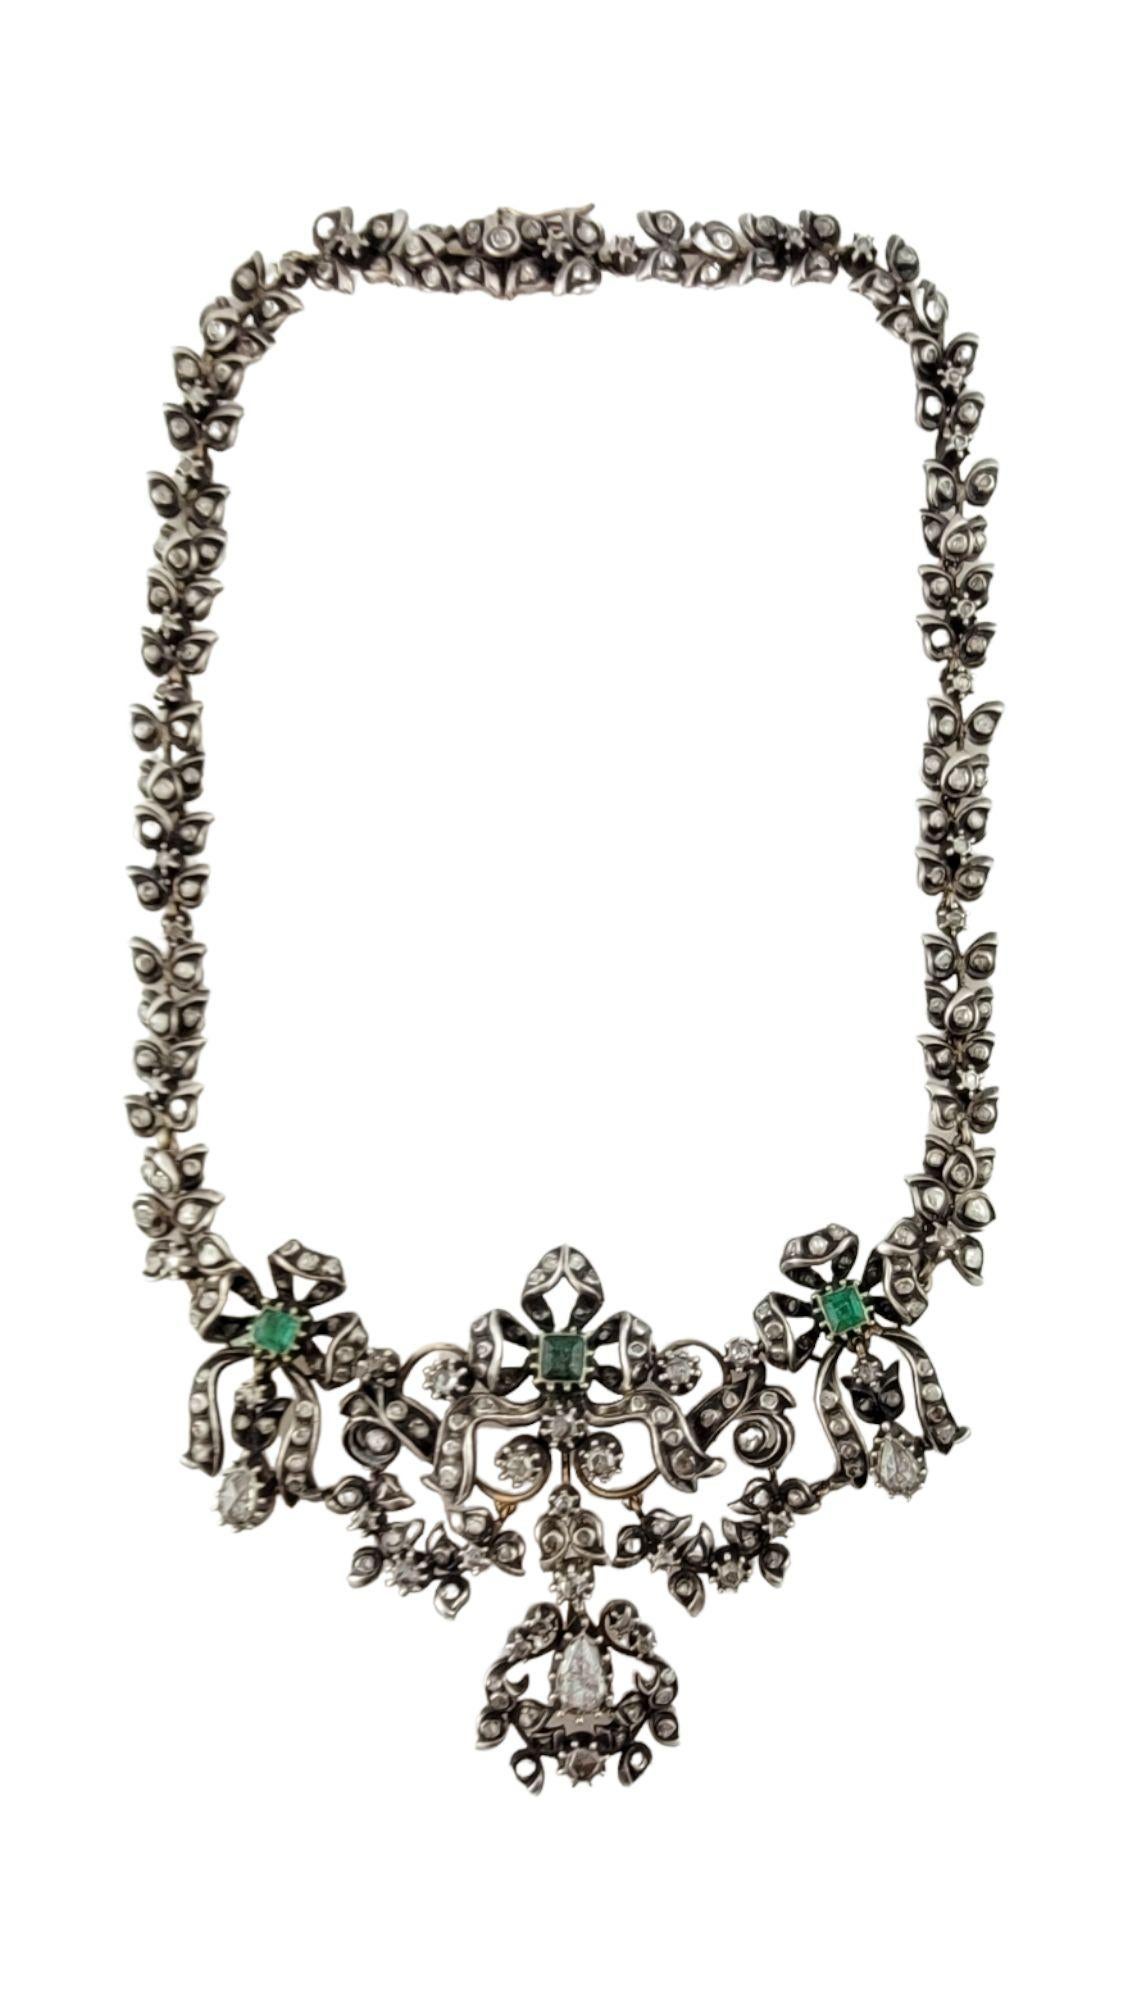 Georgian Silver over Gold Diamond and Emerald Collar / Choker Necklace

This stunning necklace is from the 18th Century Georgian era. This necklace is what you would have seen worn at evenings by a wealthy Georgian lady.

The necklace is set in